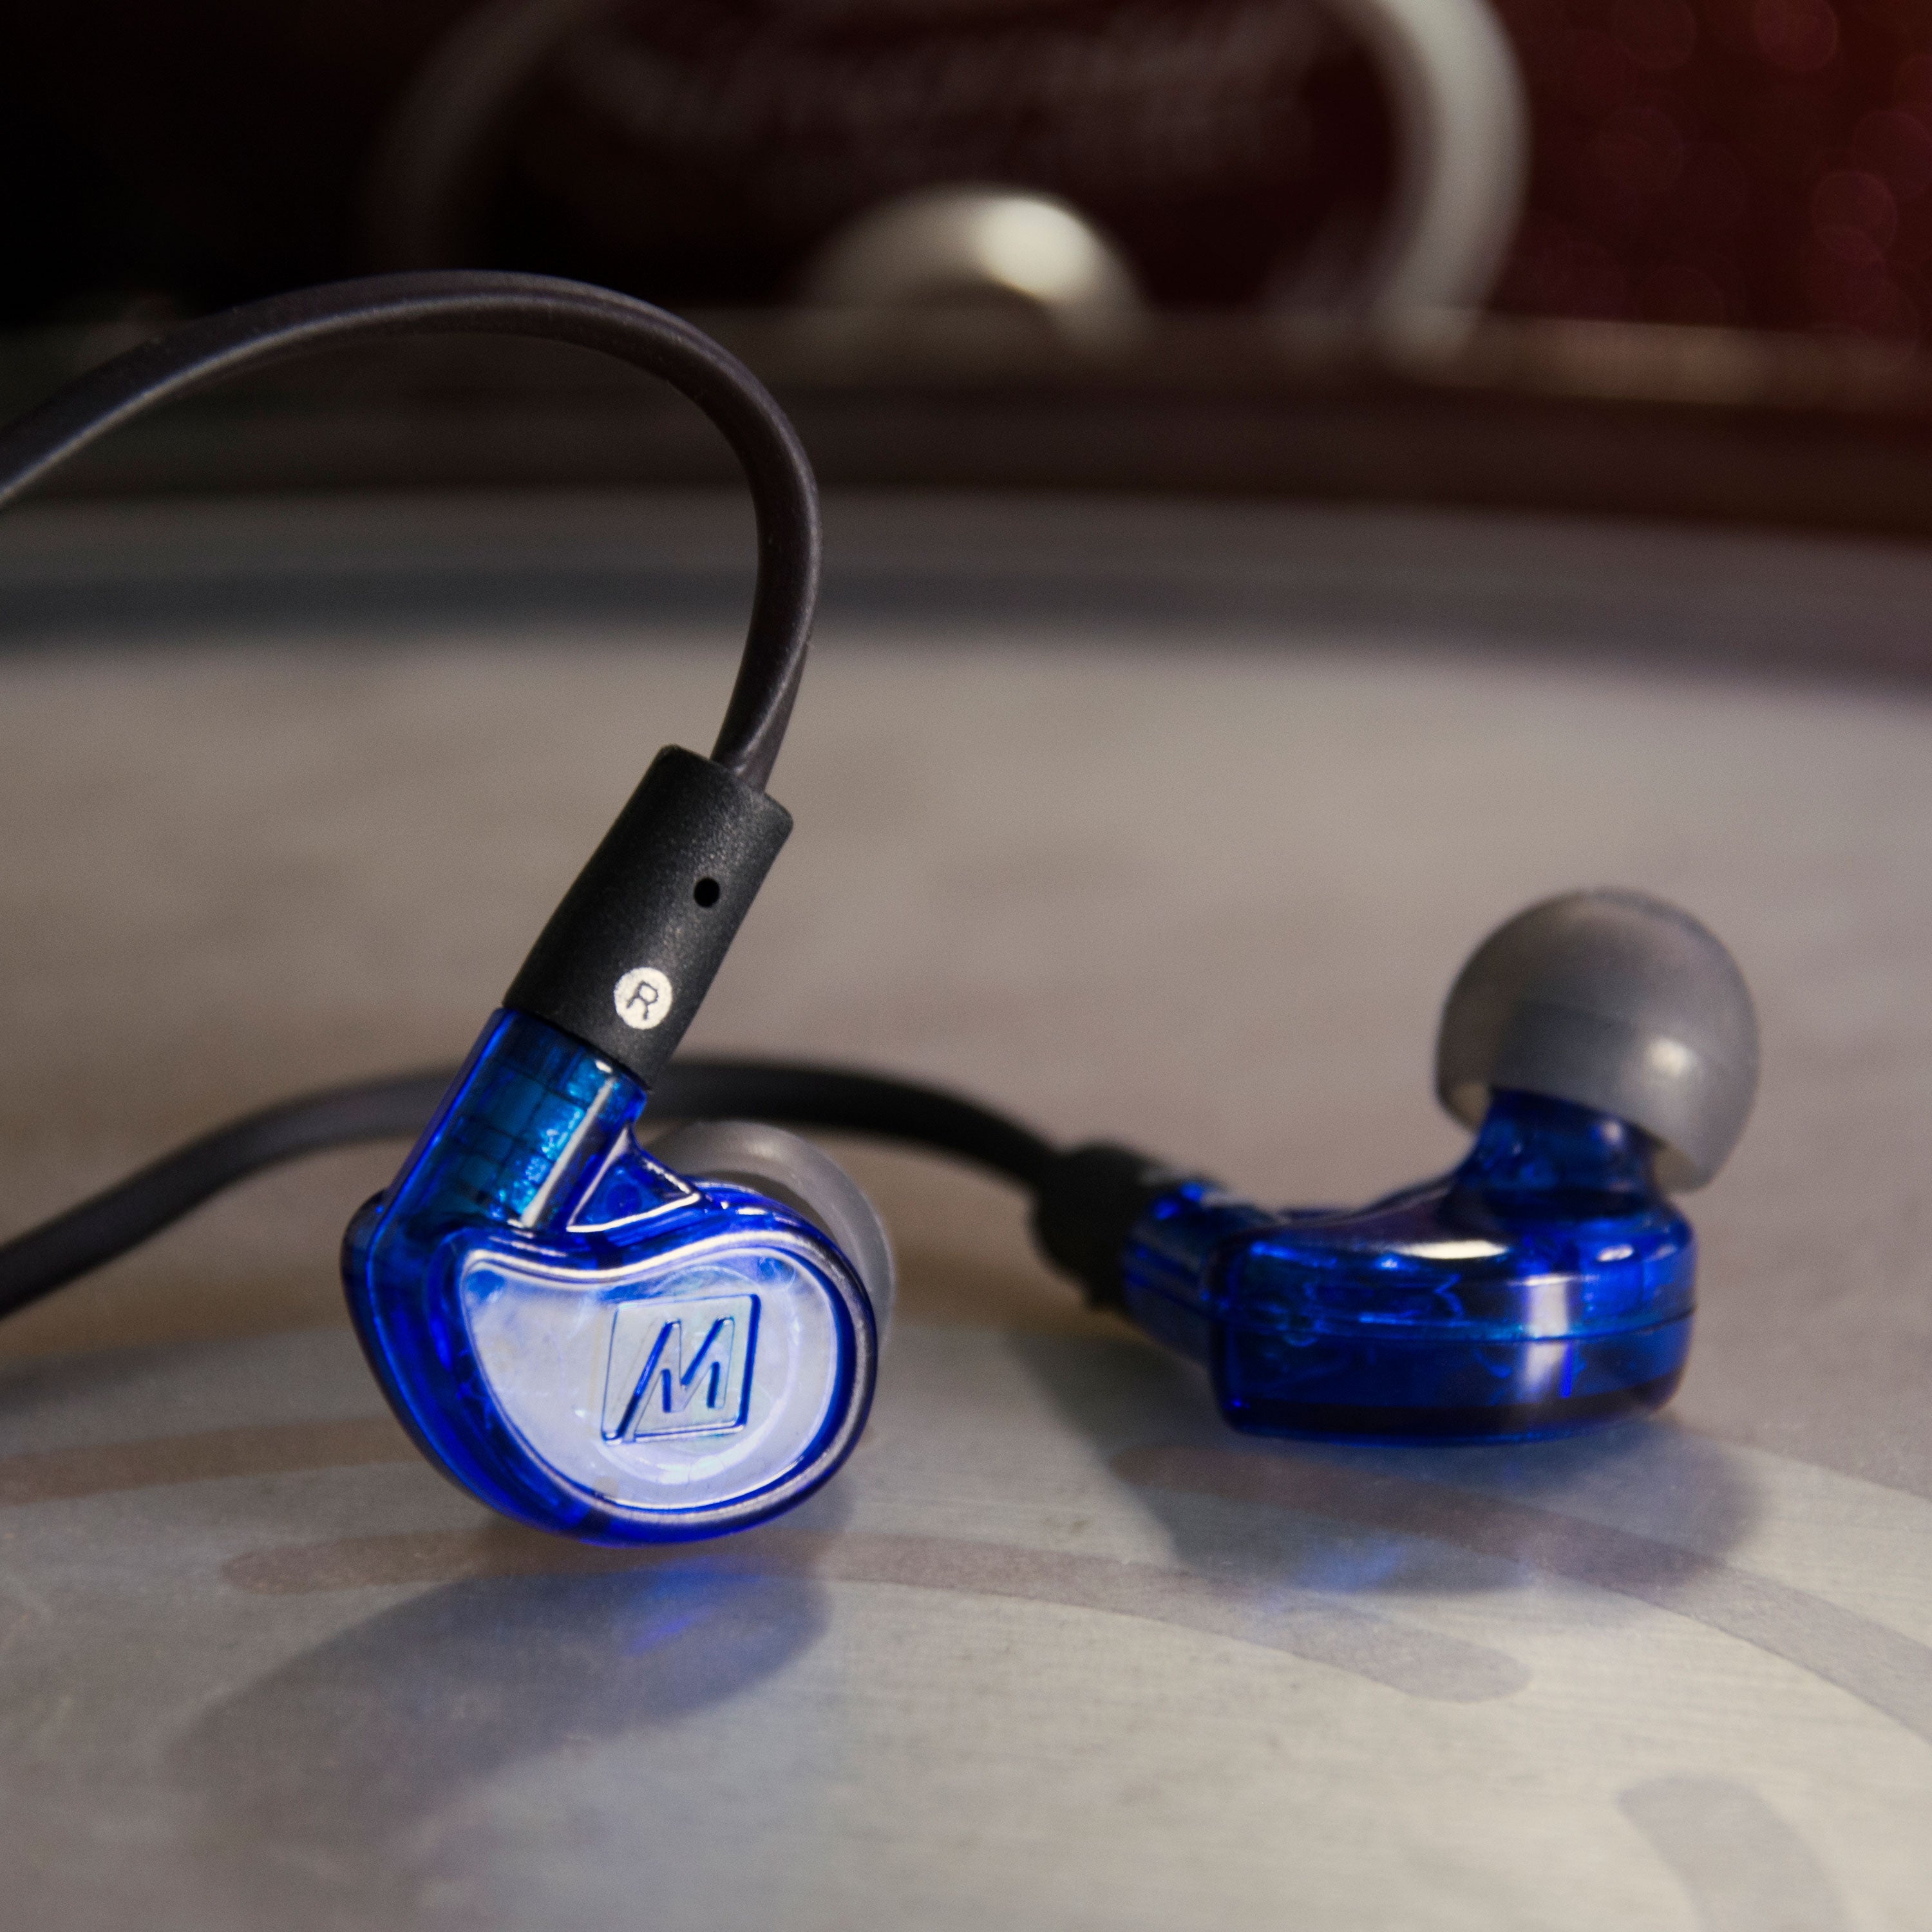 A pair of blue, transparent in-ear headphones with a visible logo on the sides, resting on a gray surface against a softly blurred background.